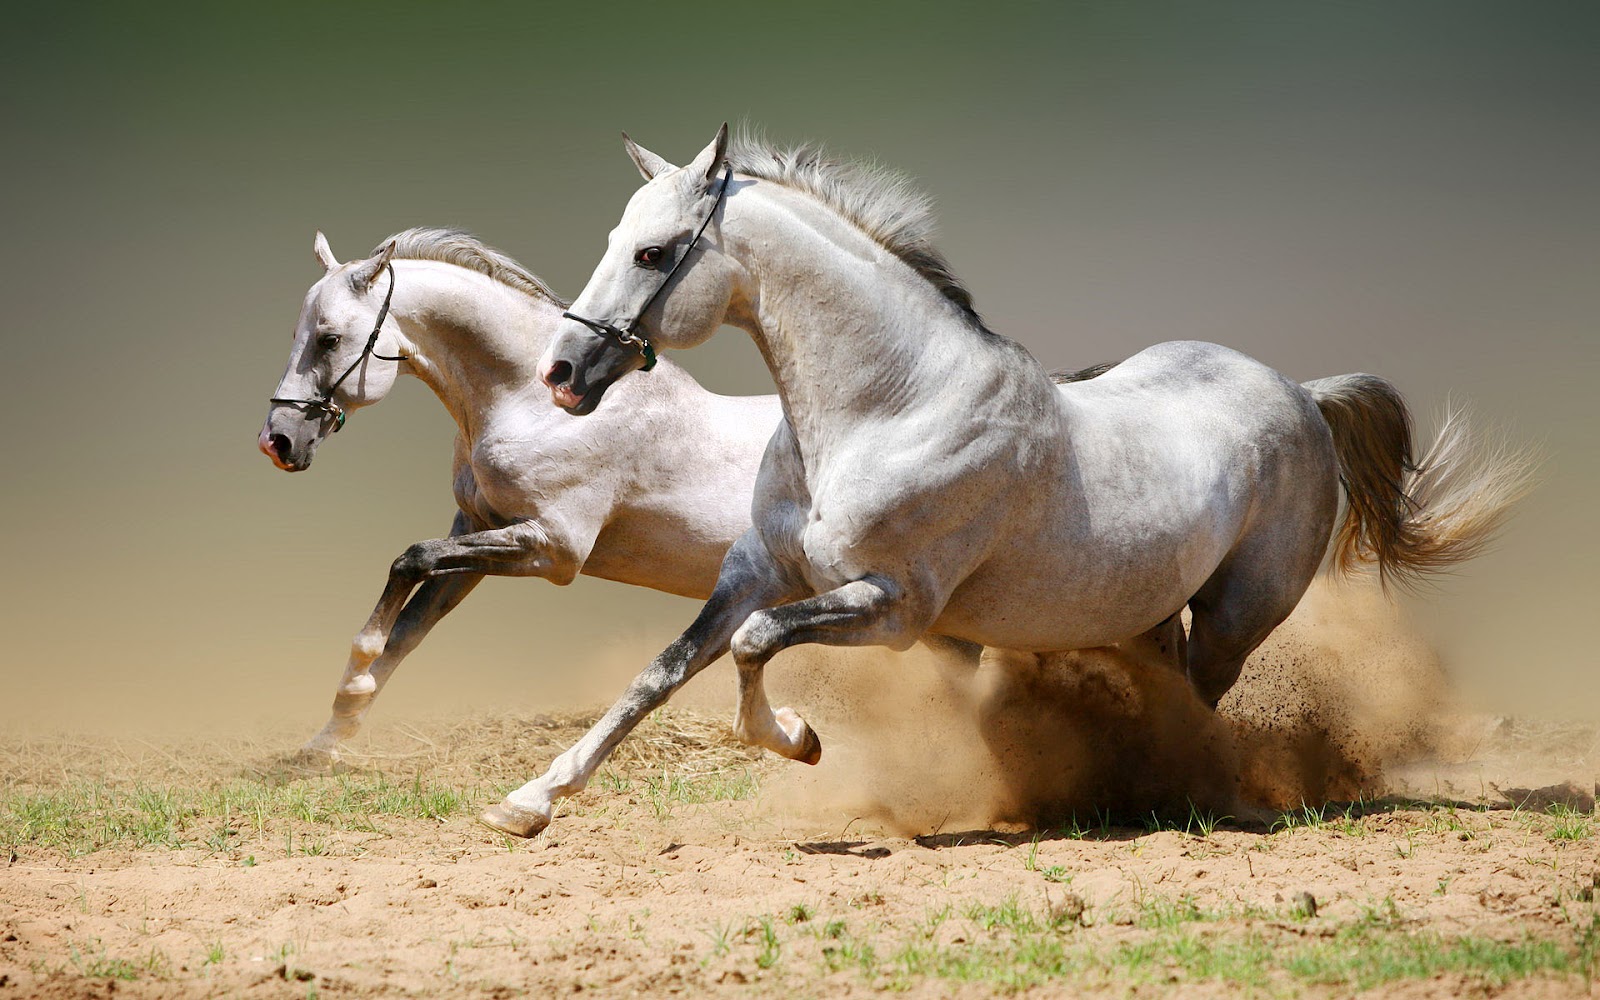 With White Horses Running Fast Horse Wallpaper Backgrounds - Arabian Horse High Resolution - HD Wallpaper 